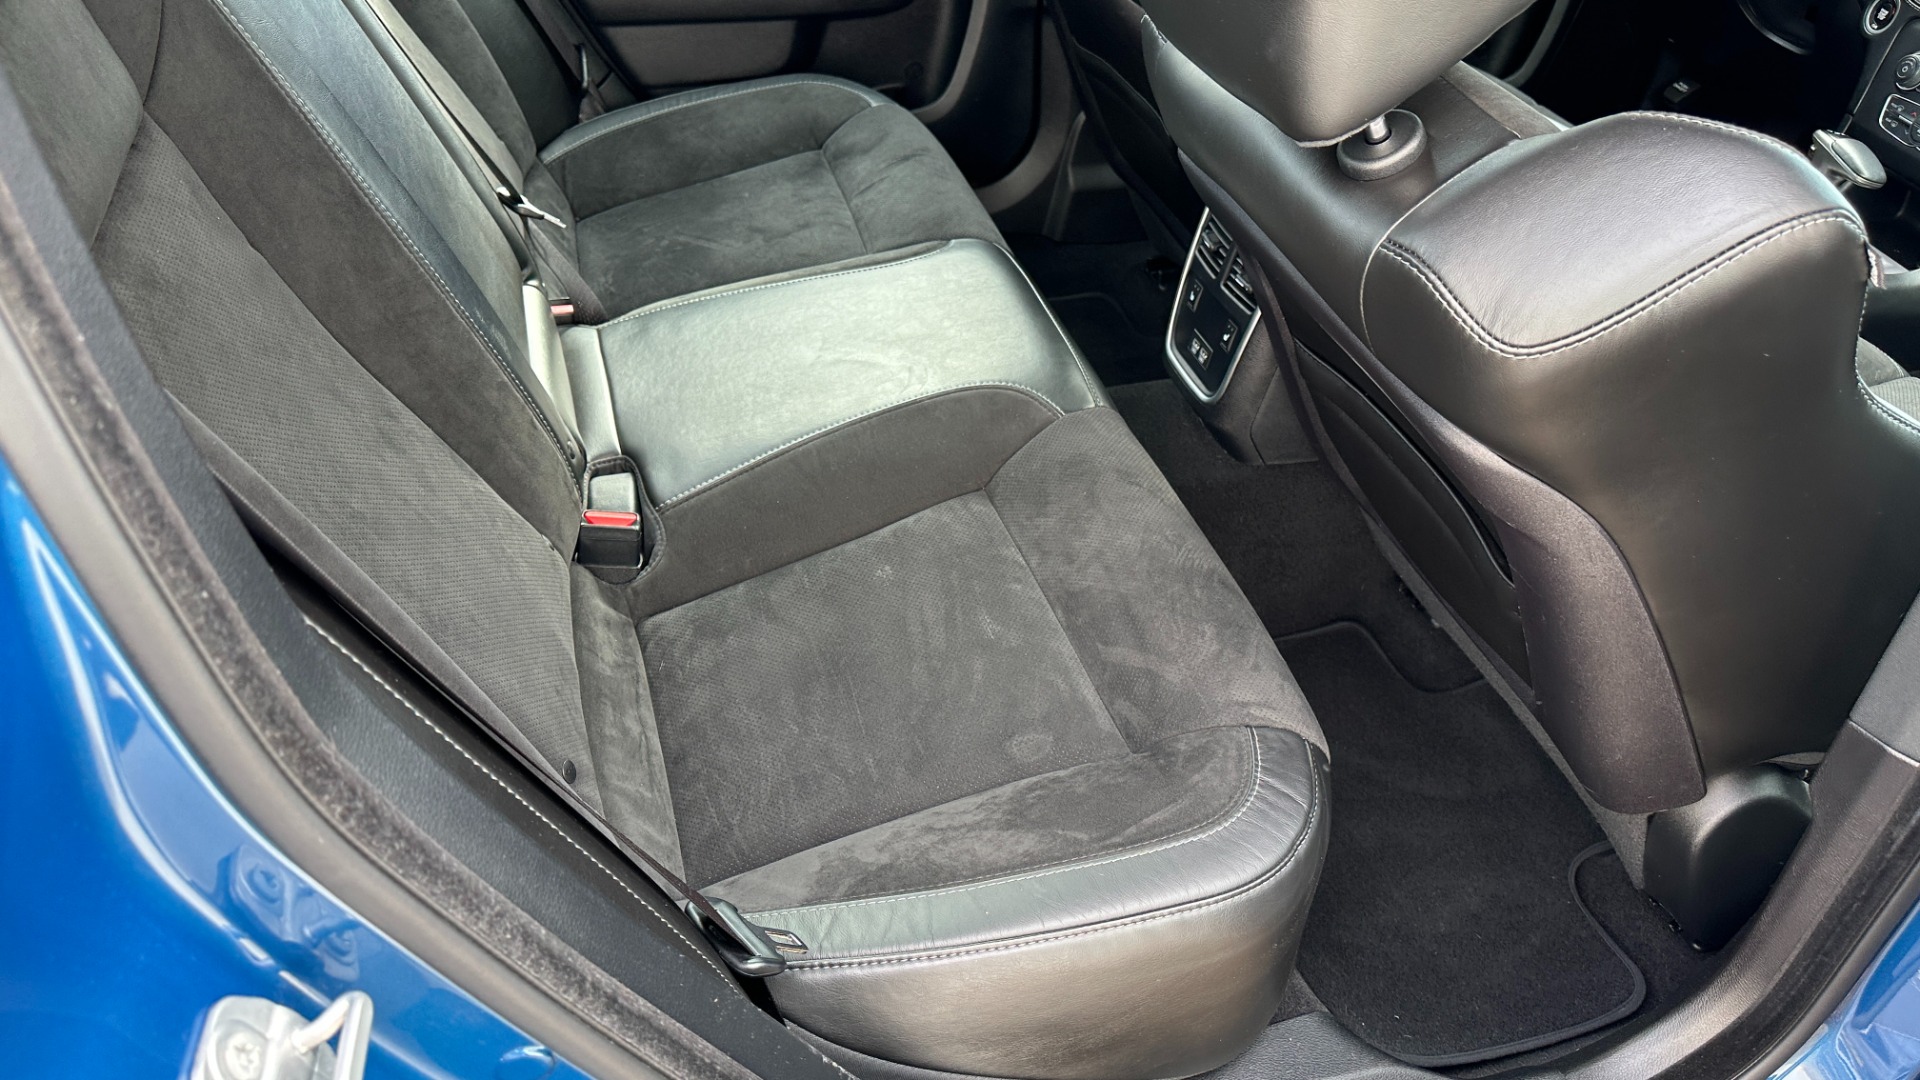 Used 2020 Dodge Charger SCATPACK / PLUS GROUP / POWER SUNROOF / BLIND SPOT / VENTILATED SEATING for sale $46,495 at Formula Imports in Charlotte NC 28227 21